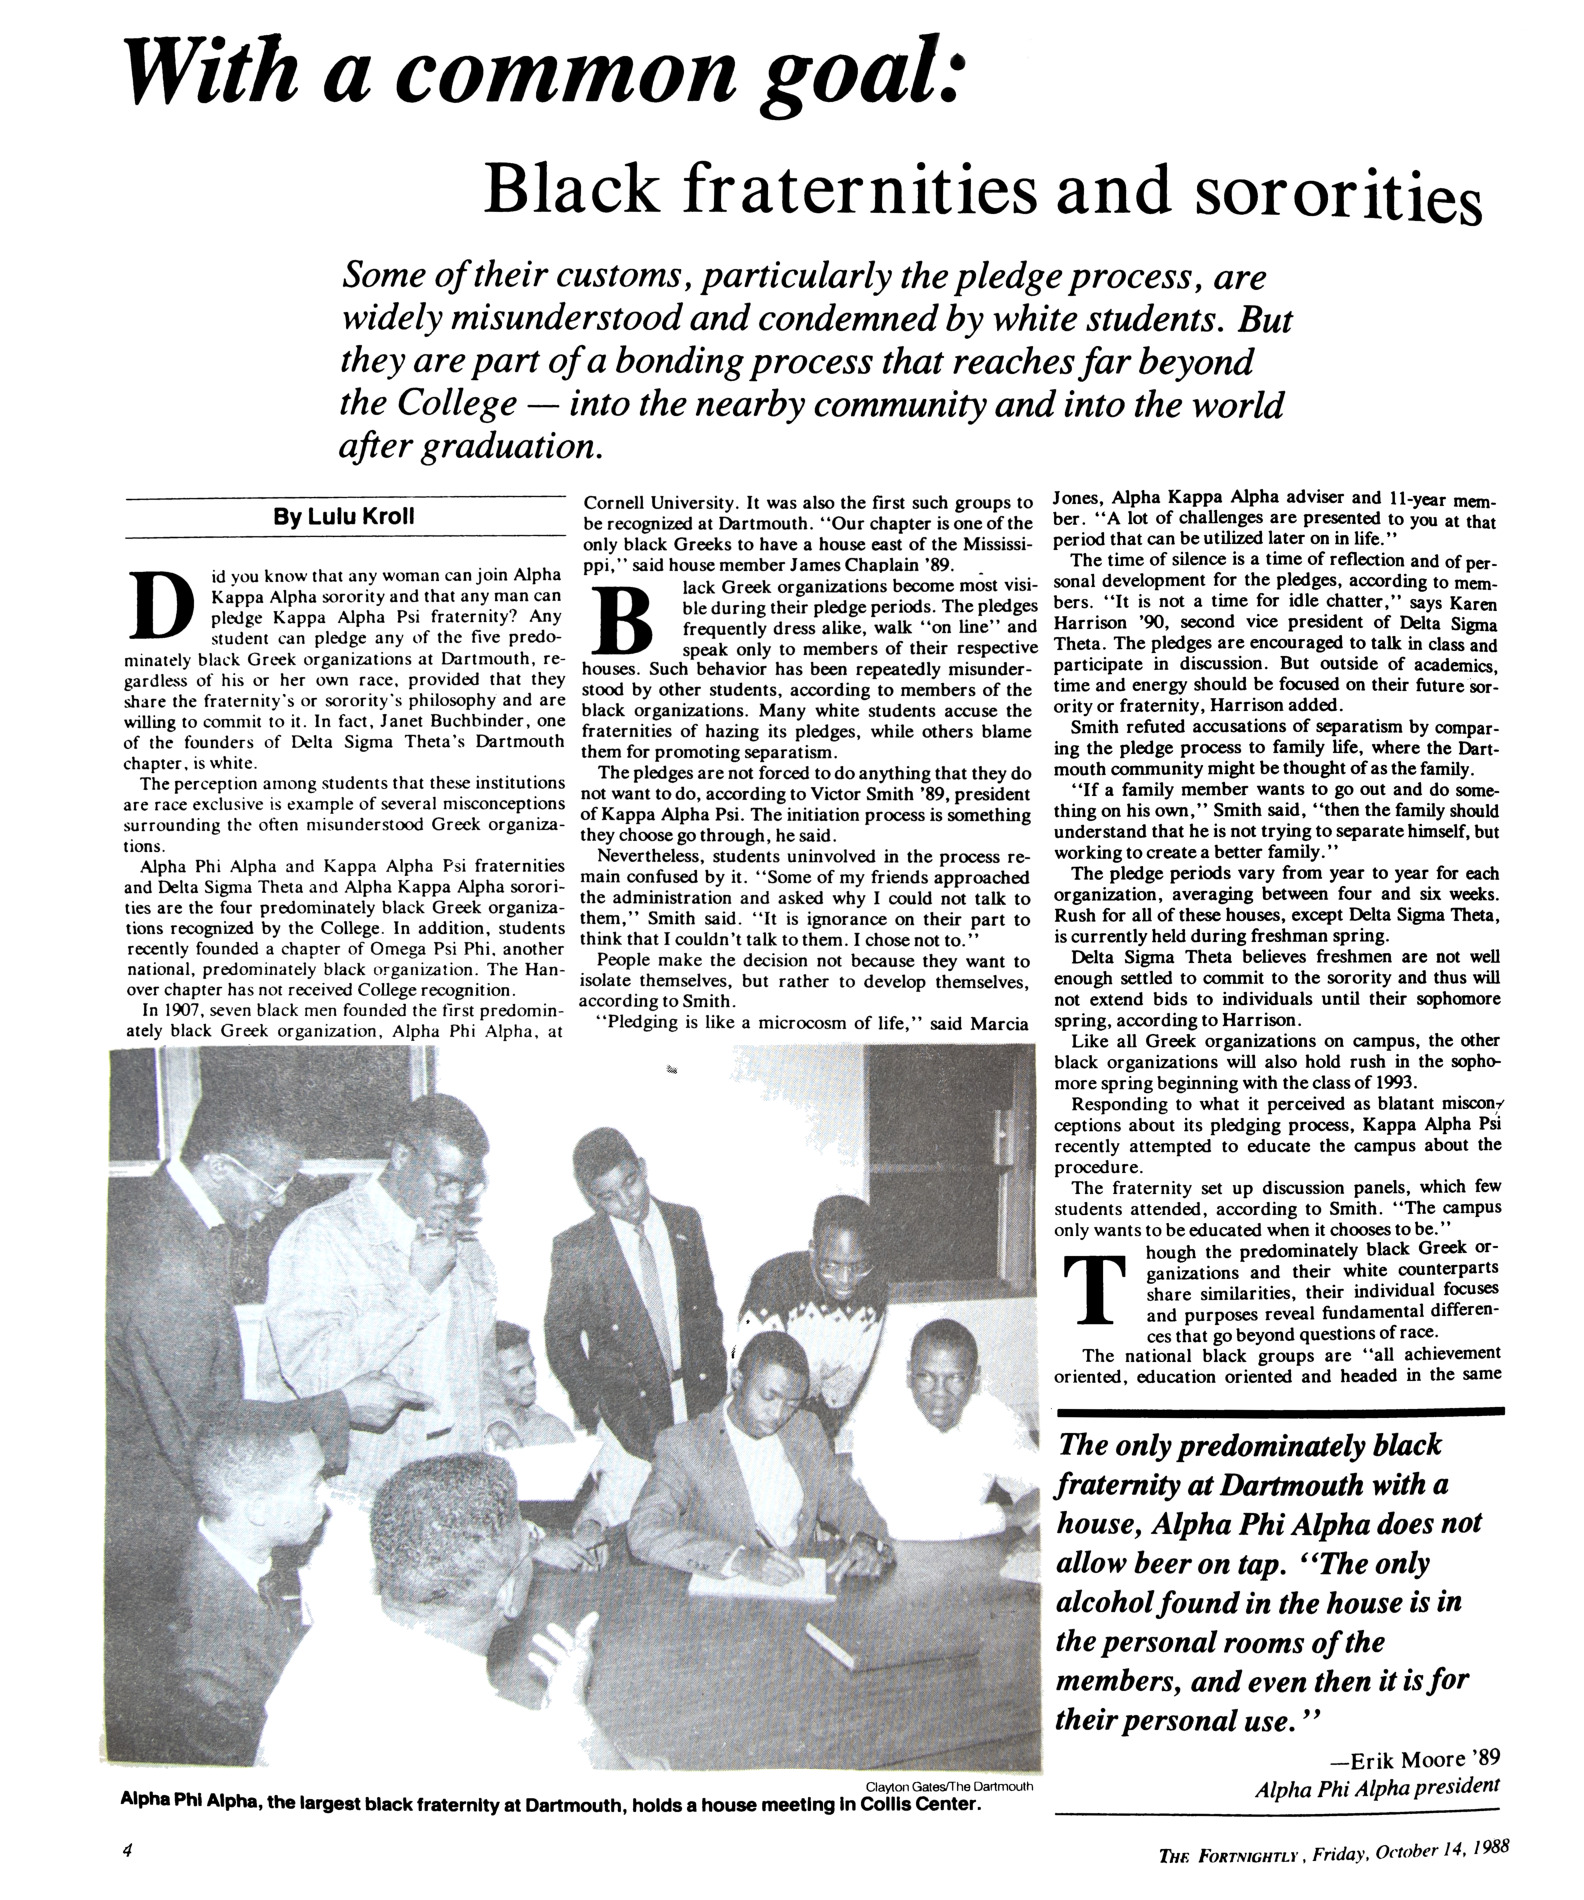 With a Common Goal: Black Fraternities and Sororities